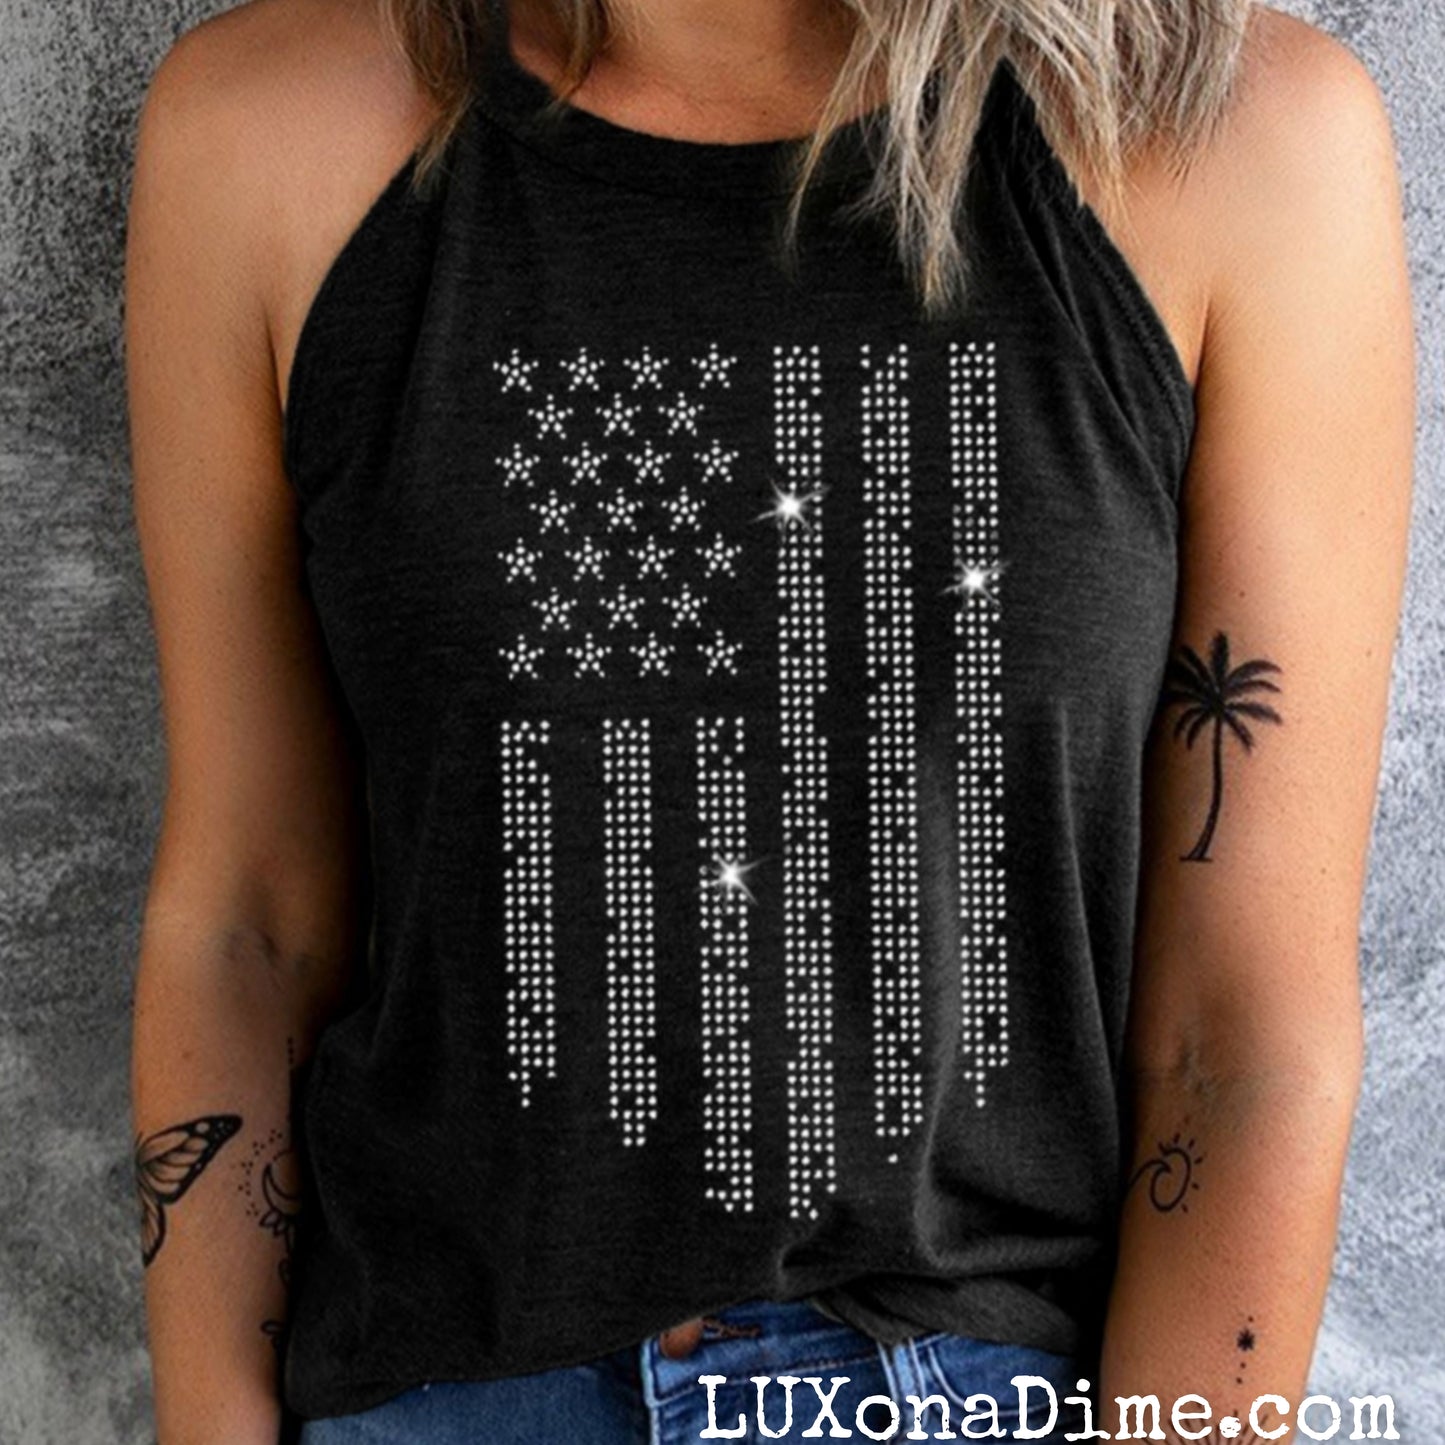 SPARKING Bling American Flag Shirt Patriotic Graphic Tank Top
(Plus Size Available)